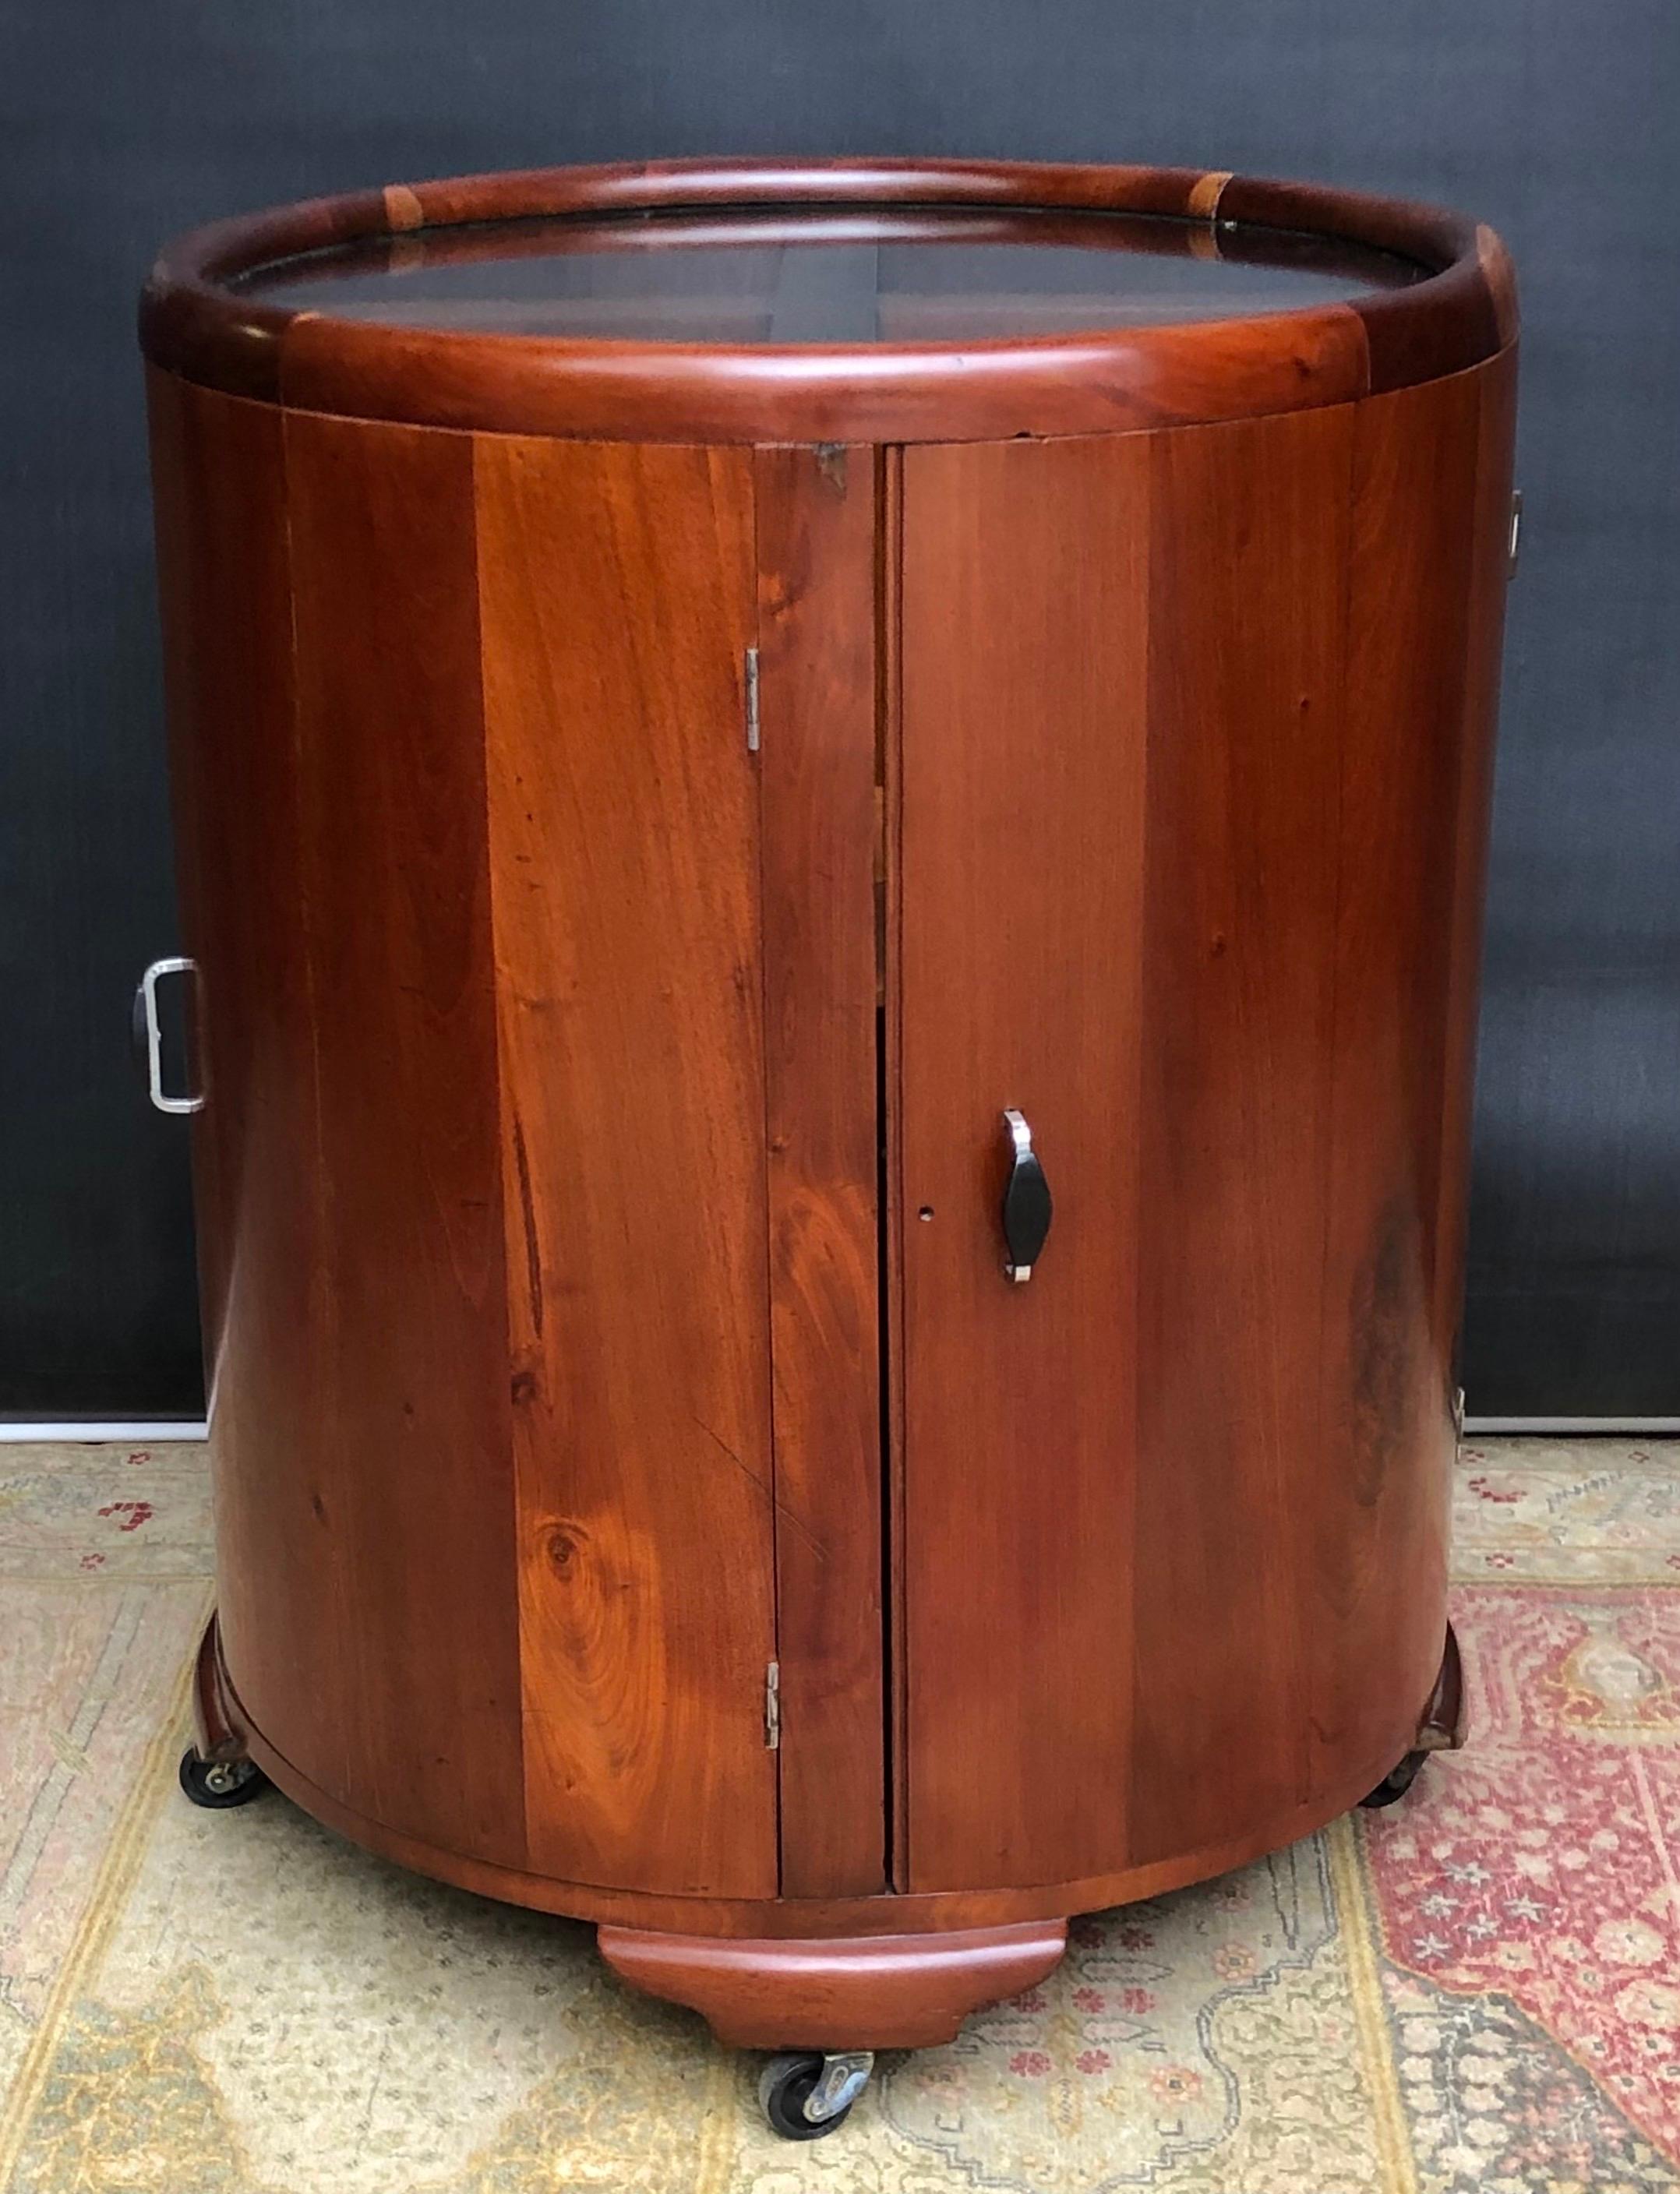 20th Century Jamaican Art Deco Round Bar/Cocktail Cabinet By Burnett Webster(circa.1934-1939) For Sale